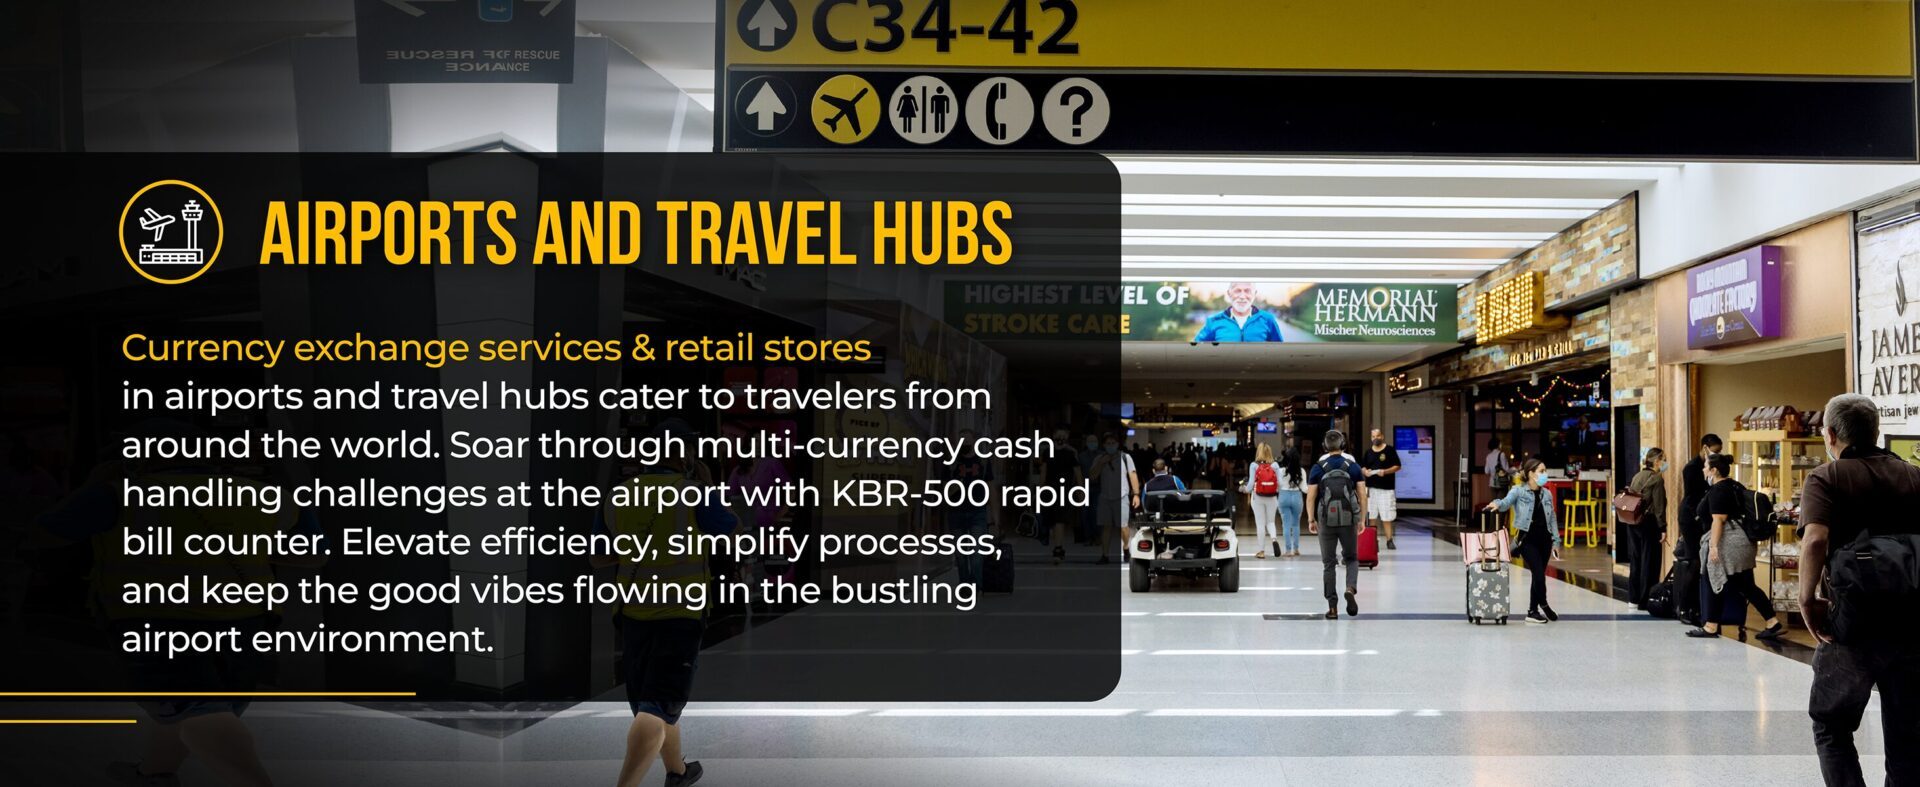 Airports and Travel Hubs